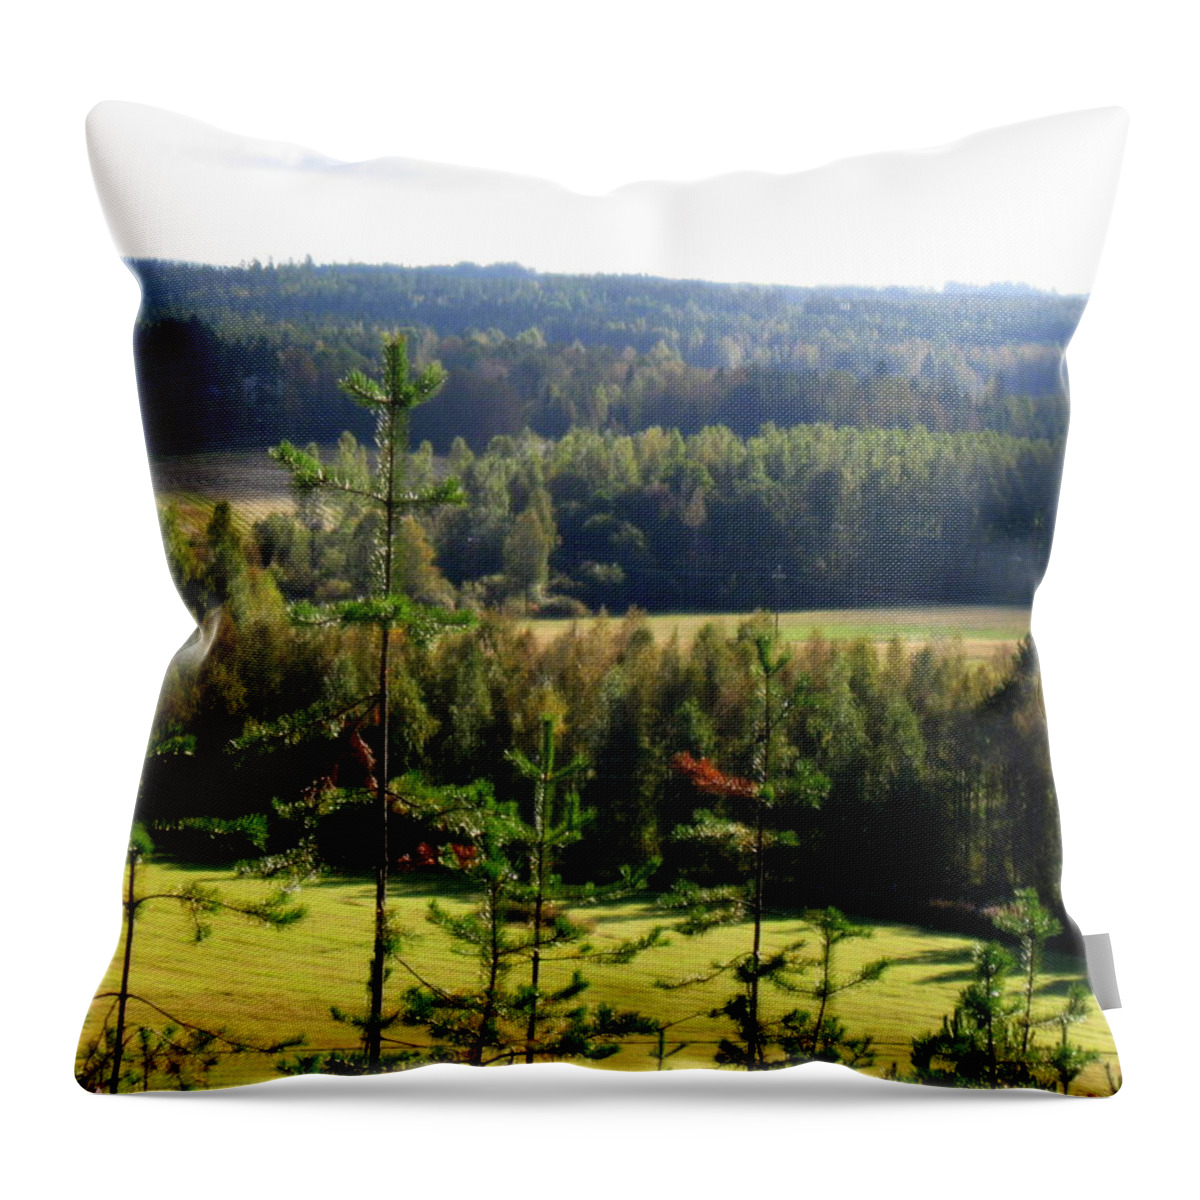 Evening Throw Pillow featuring the photograph Evening view by Pauli Hyvonen